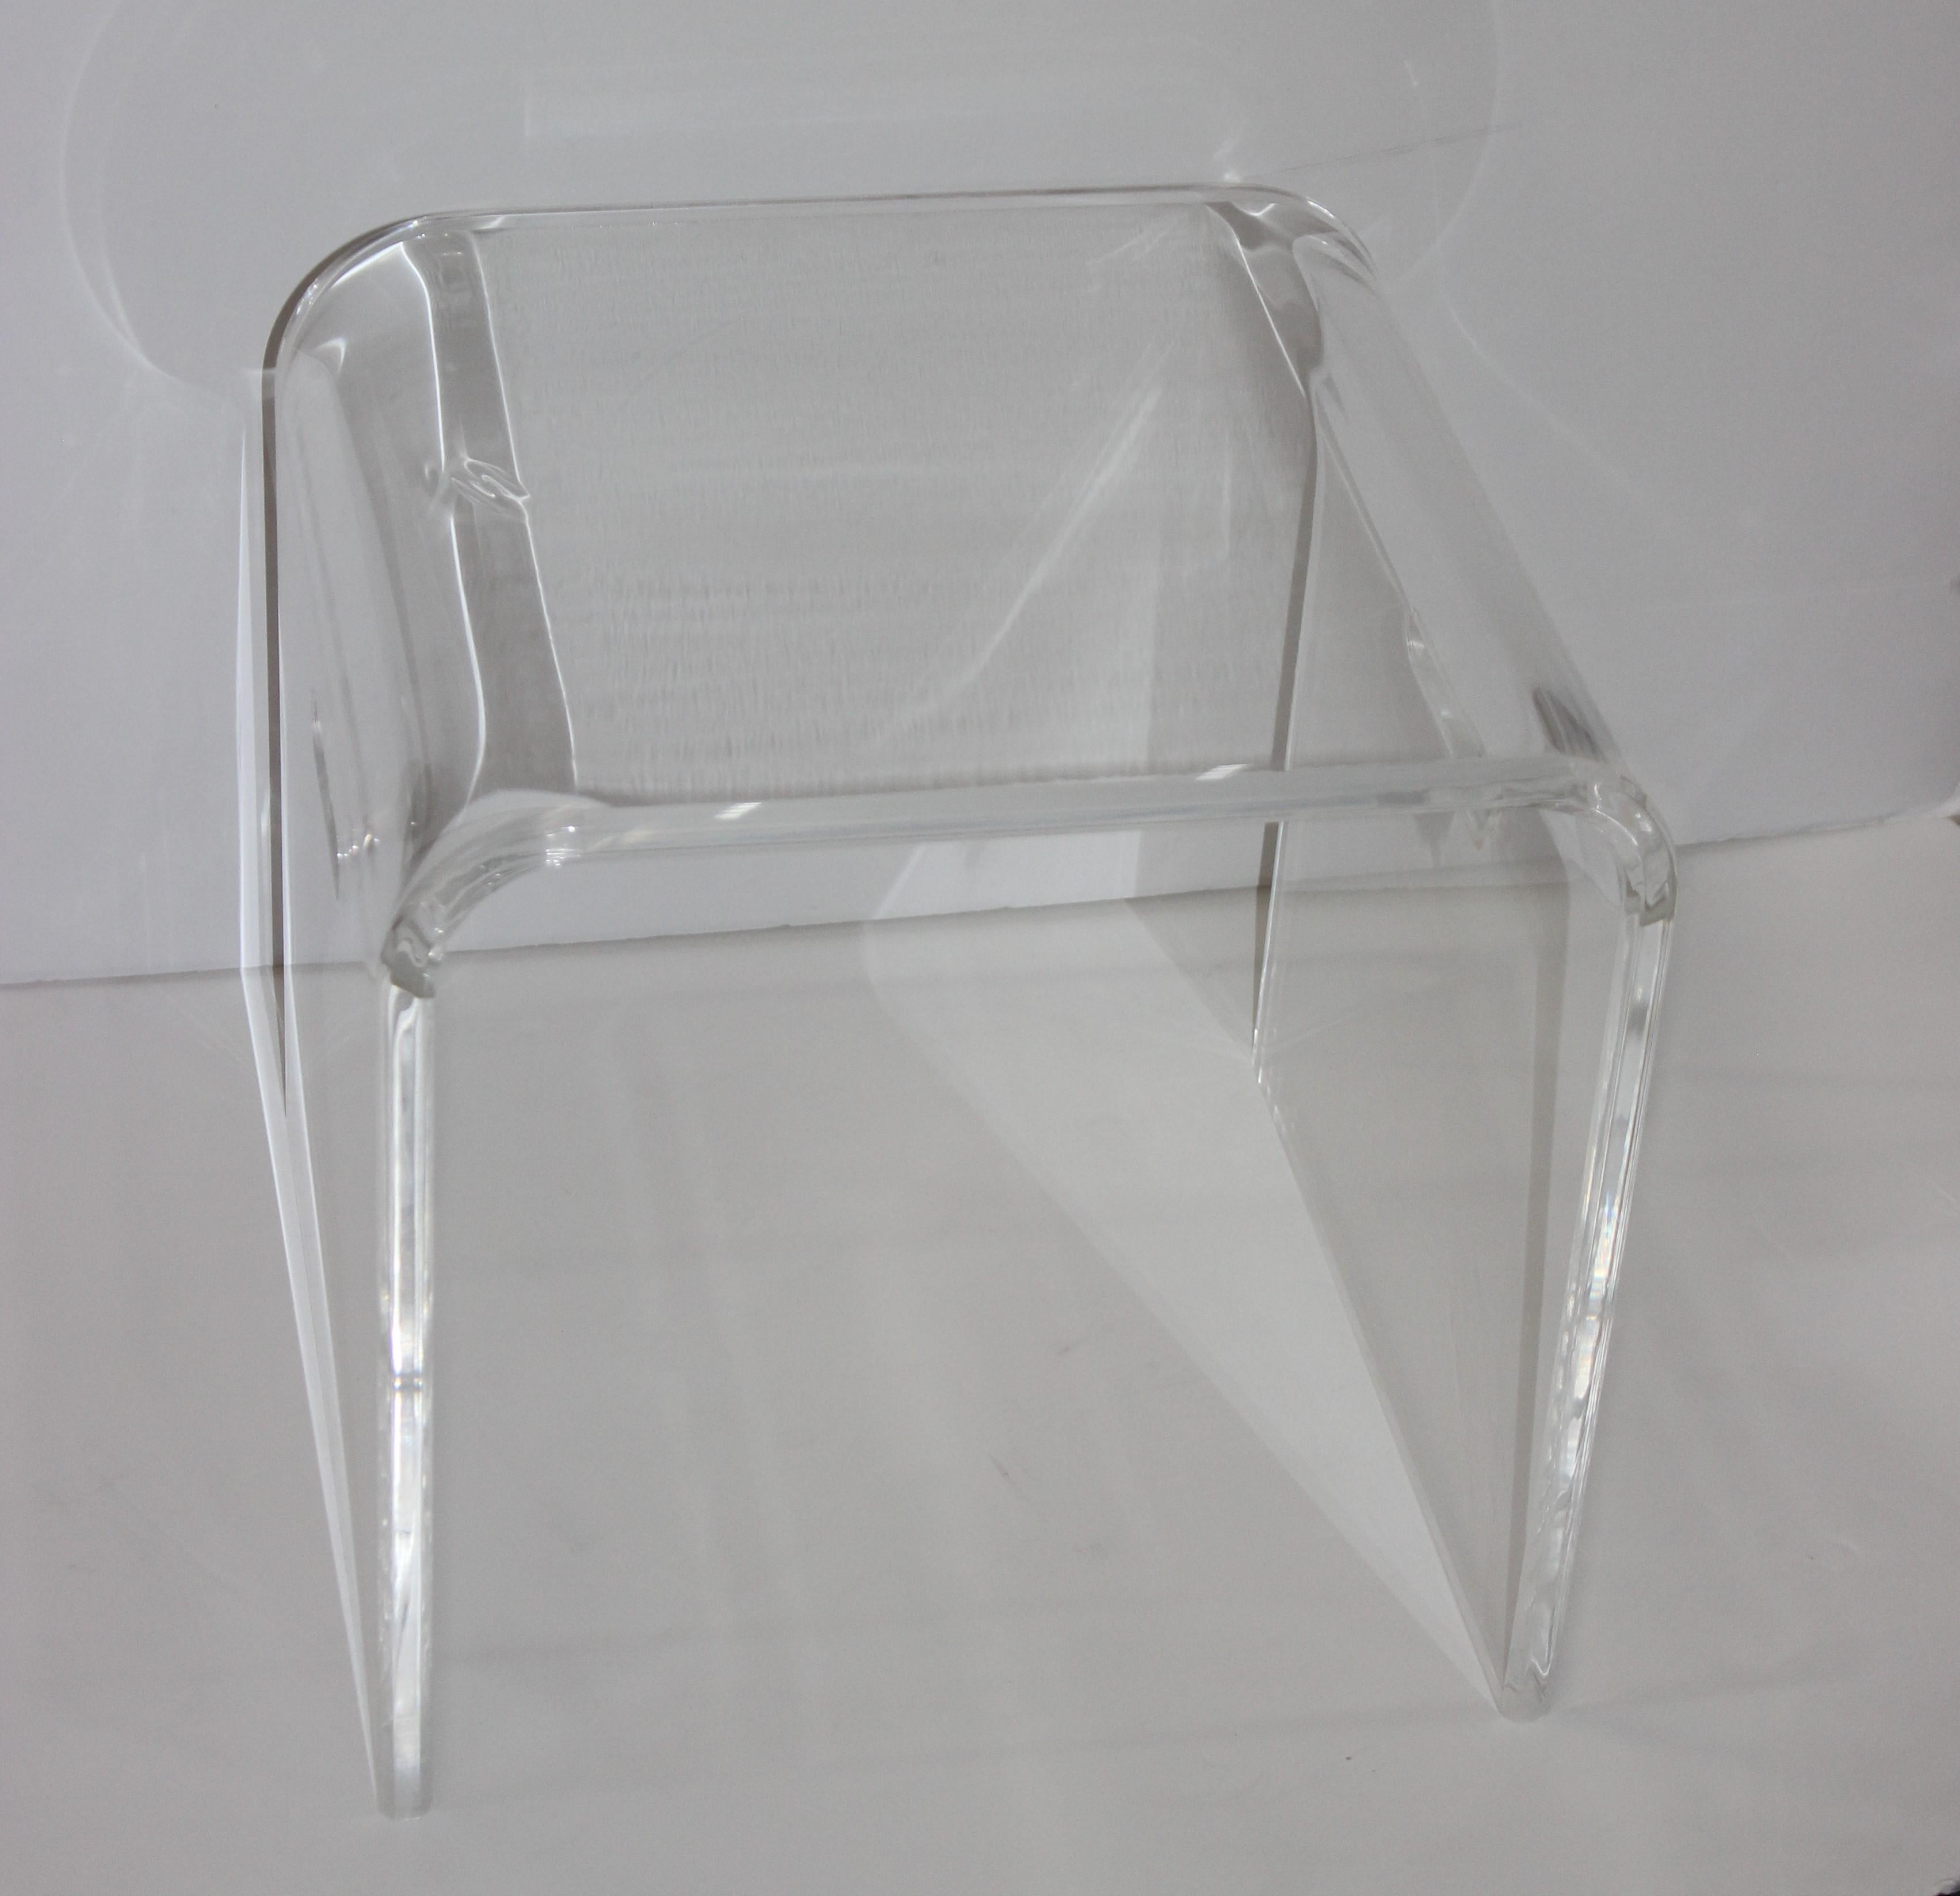 This stylish 1970s Lucite 